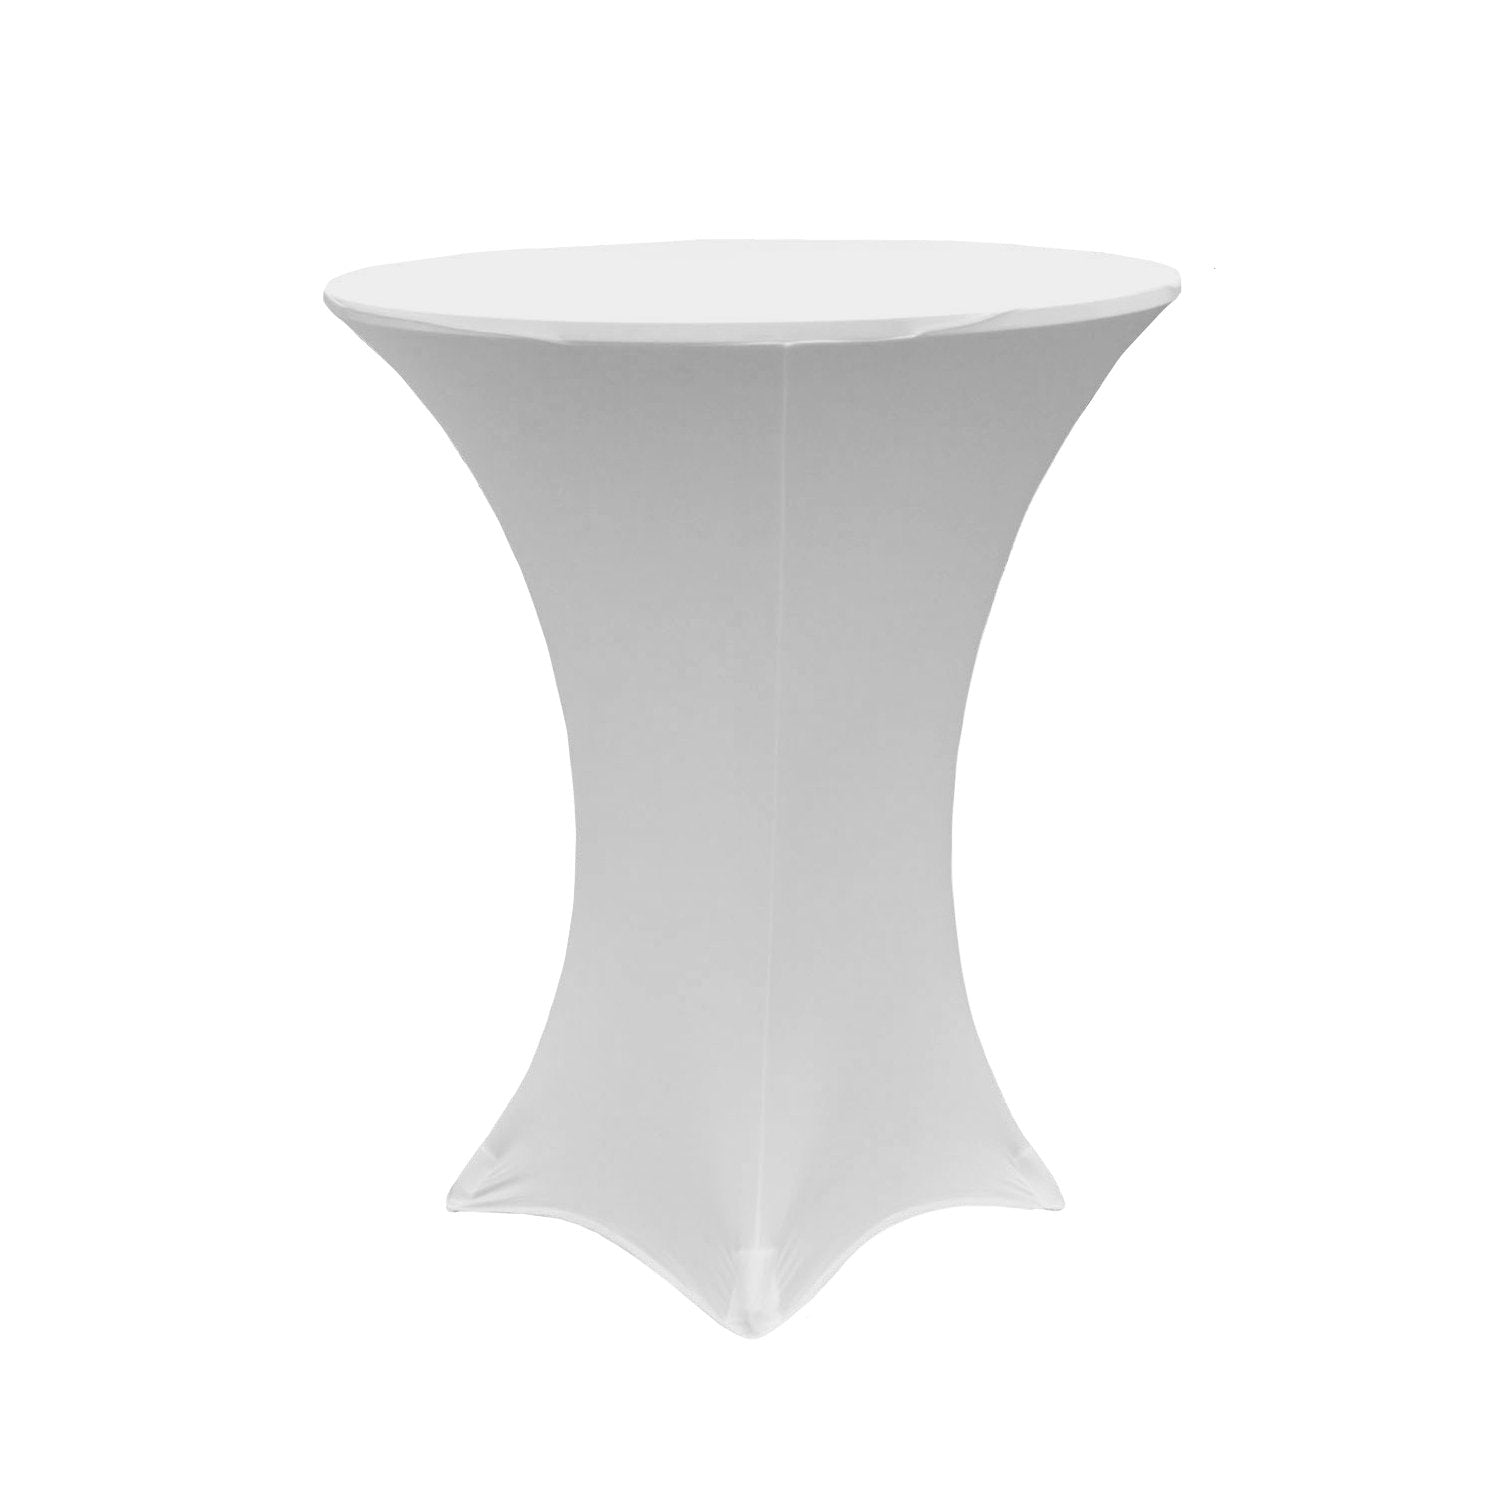 Spandex Cocktail Table Cover 36" Round - White - CV Linens